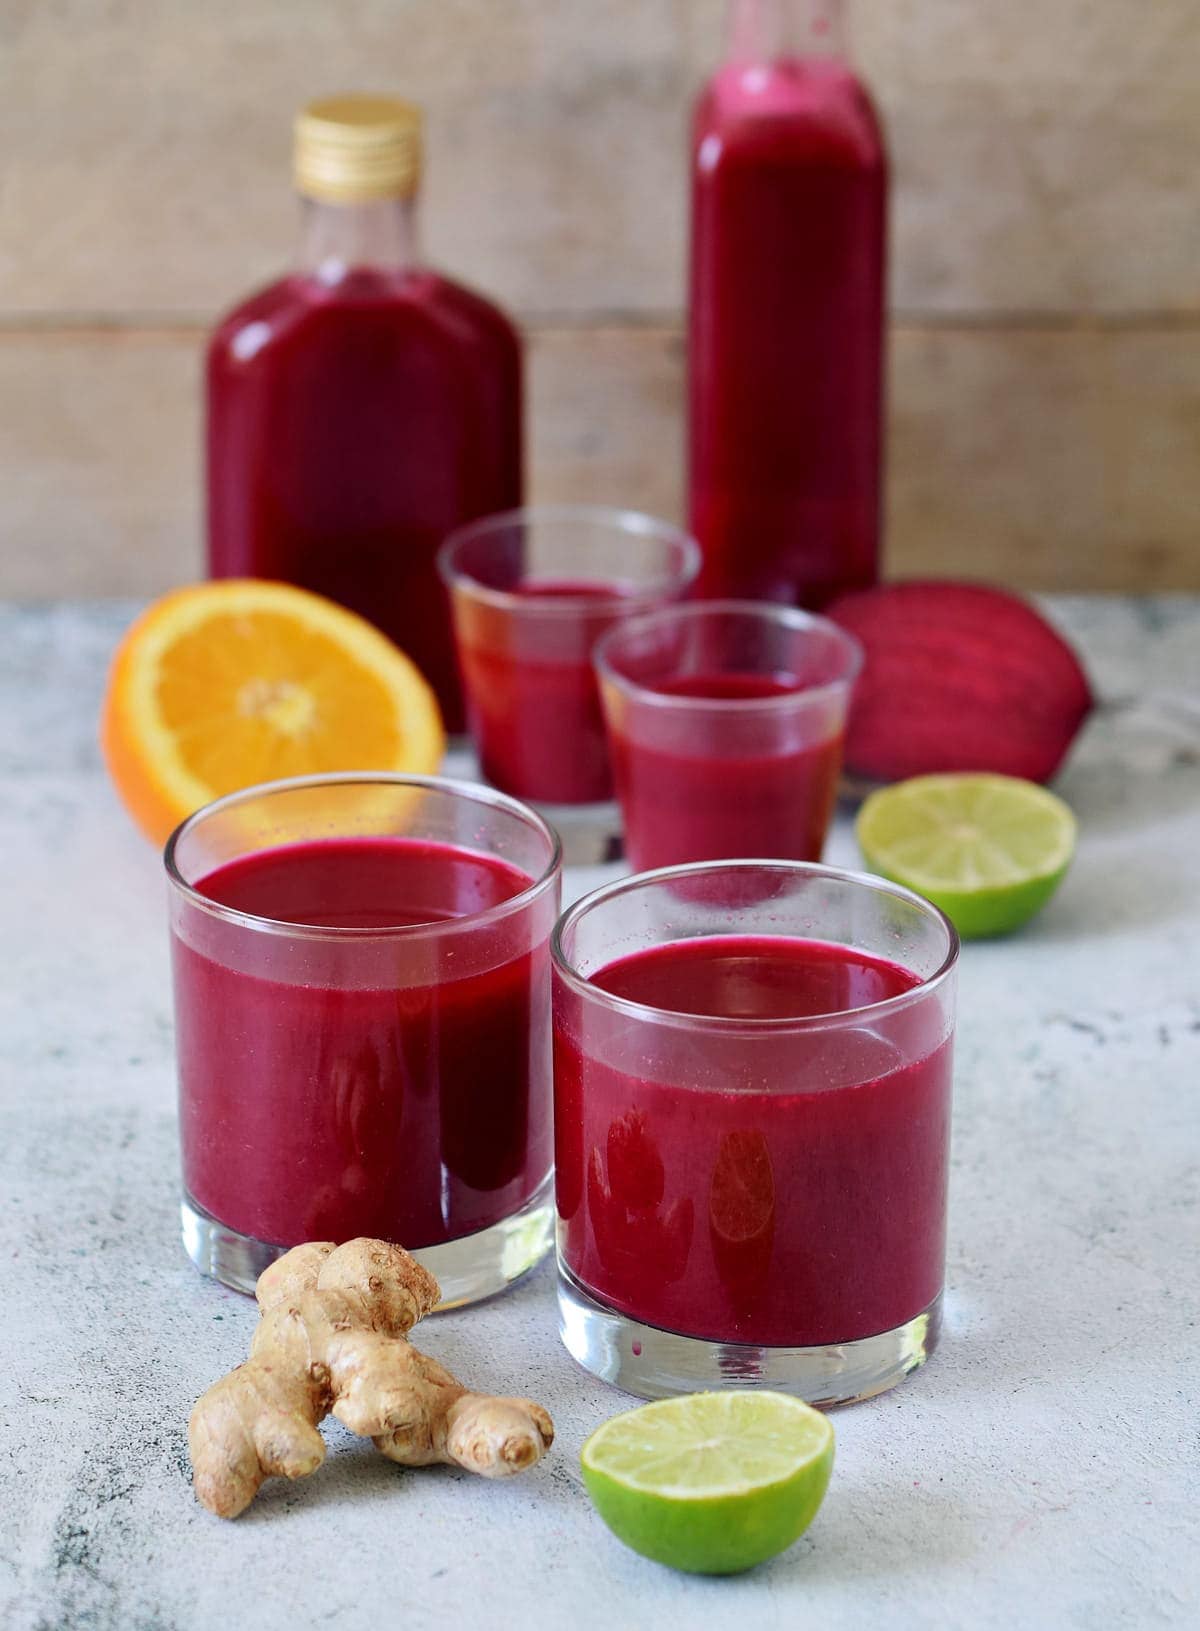 beetroot juice with orange, ginger in glasses and bottles